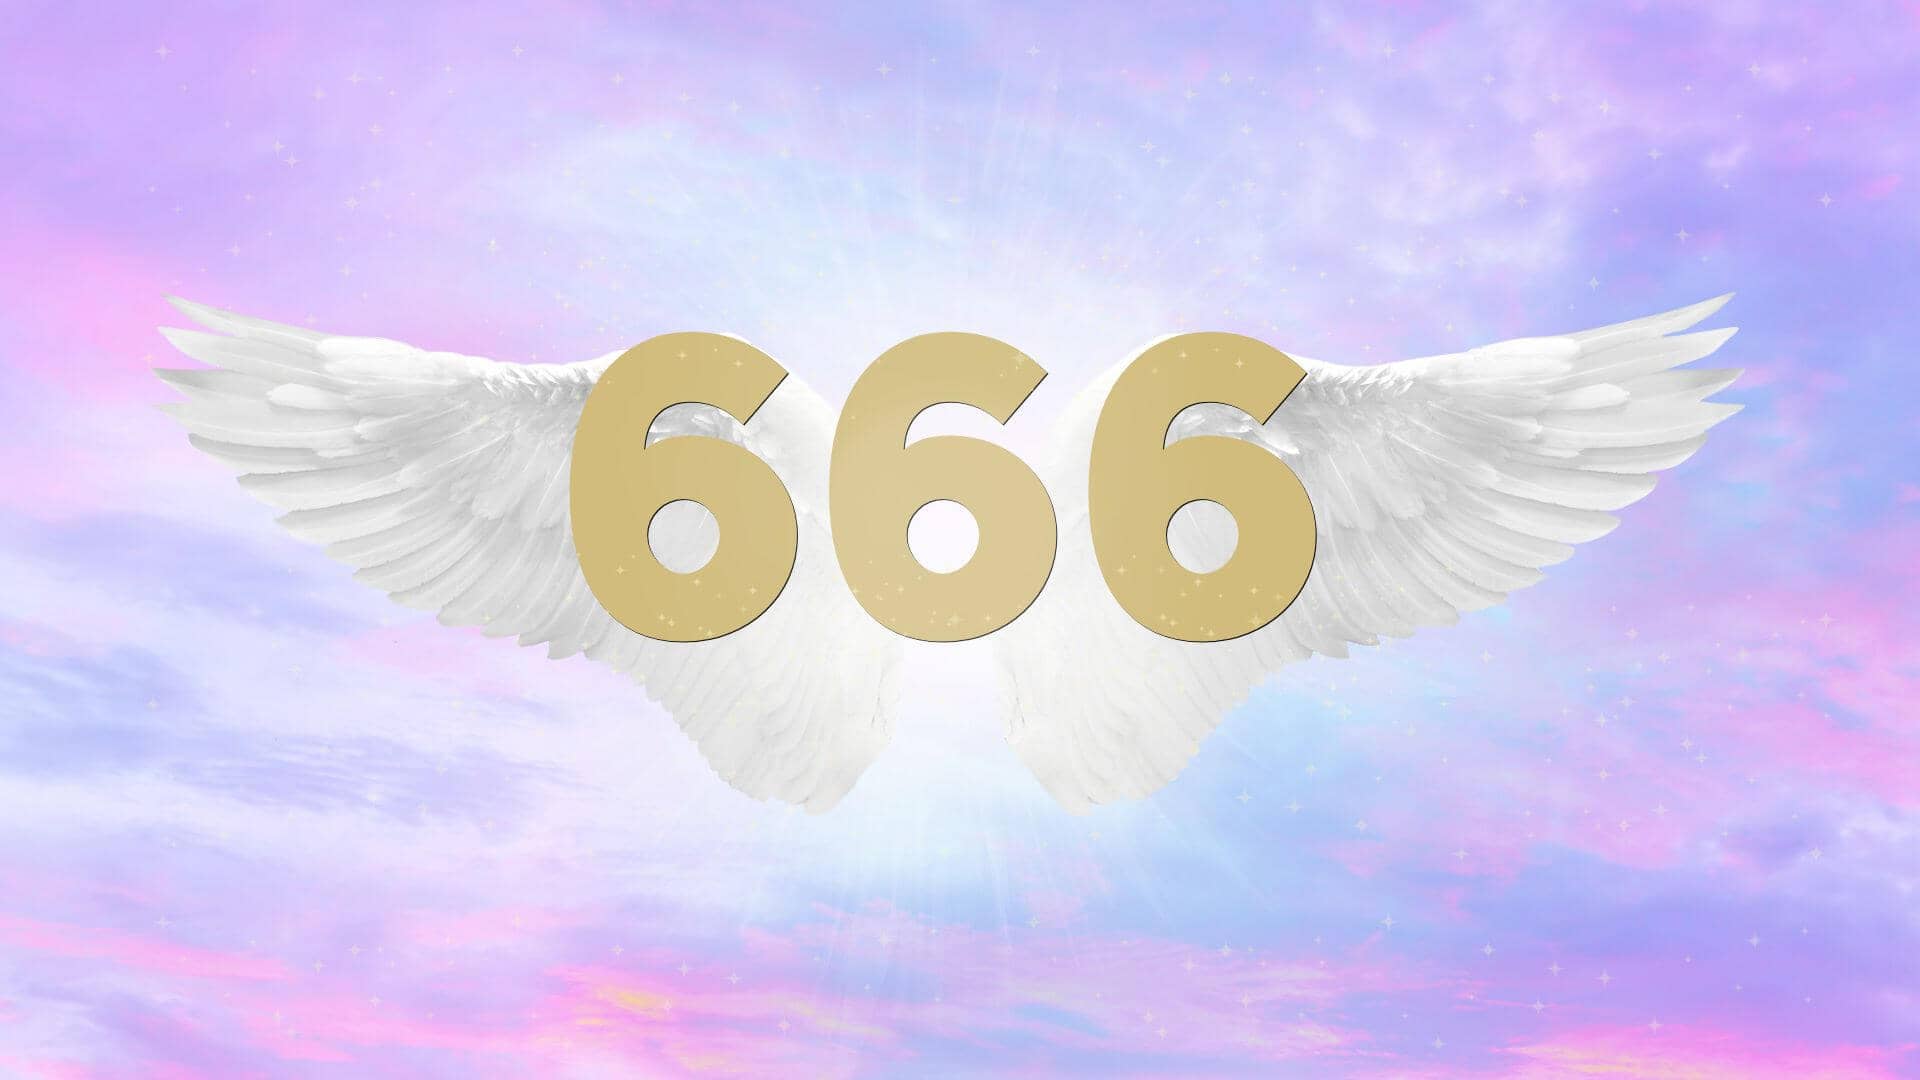 Floating 666 Angel Number with wings.